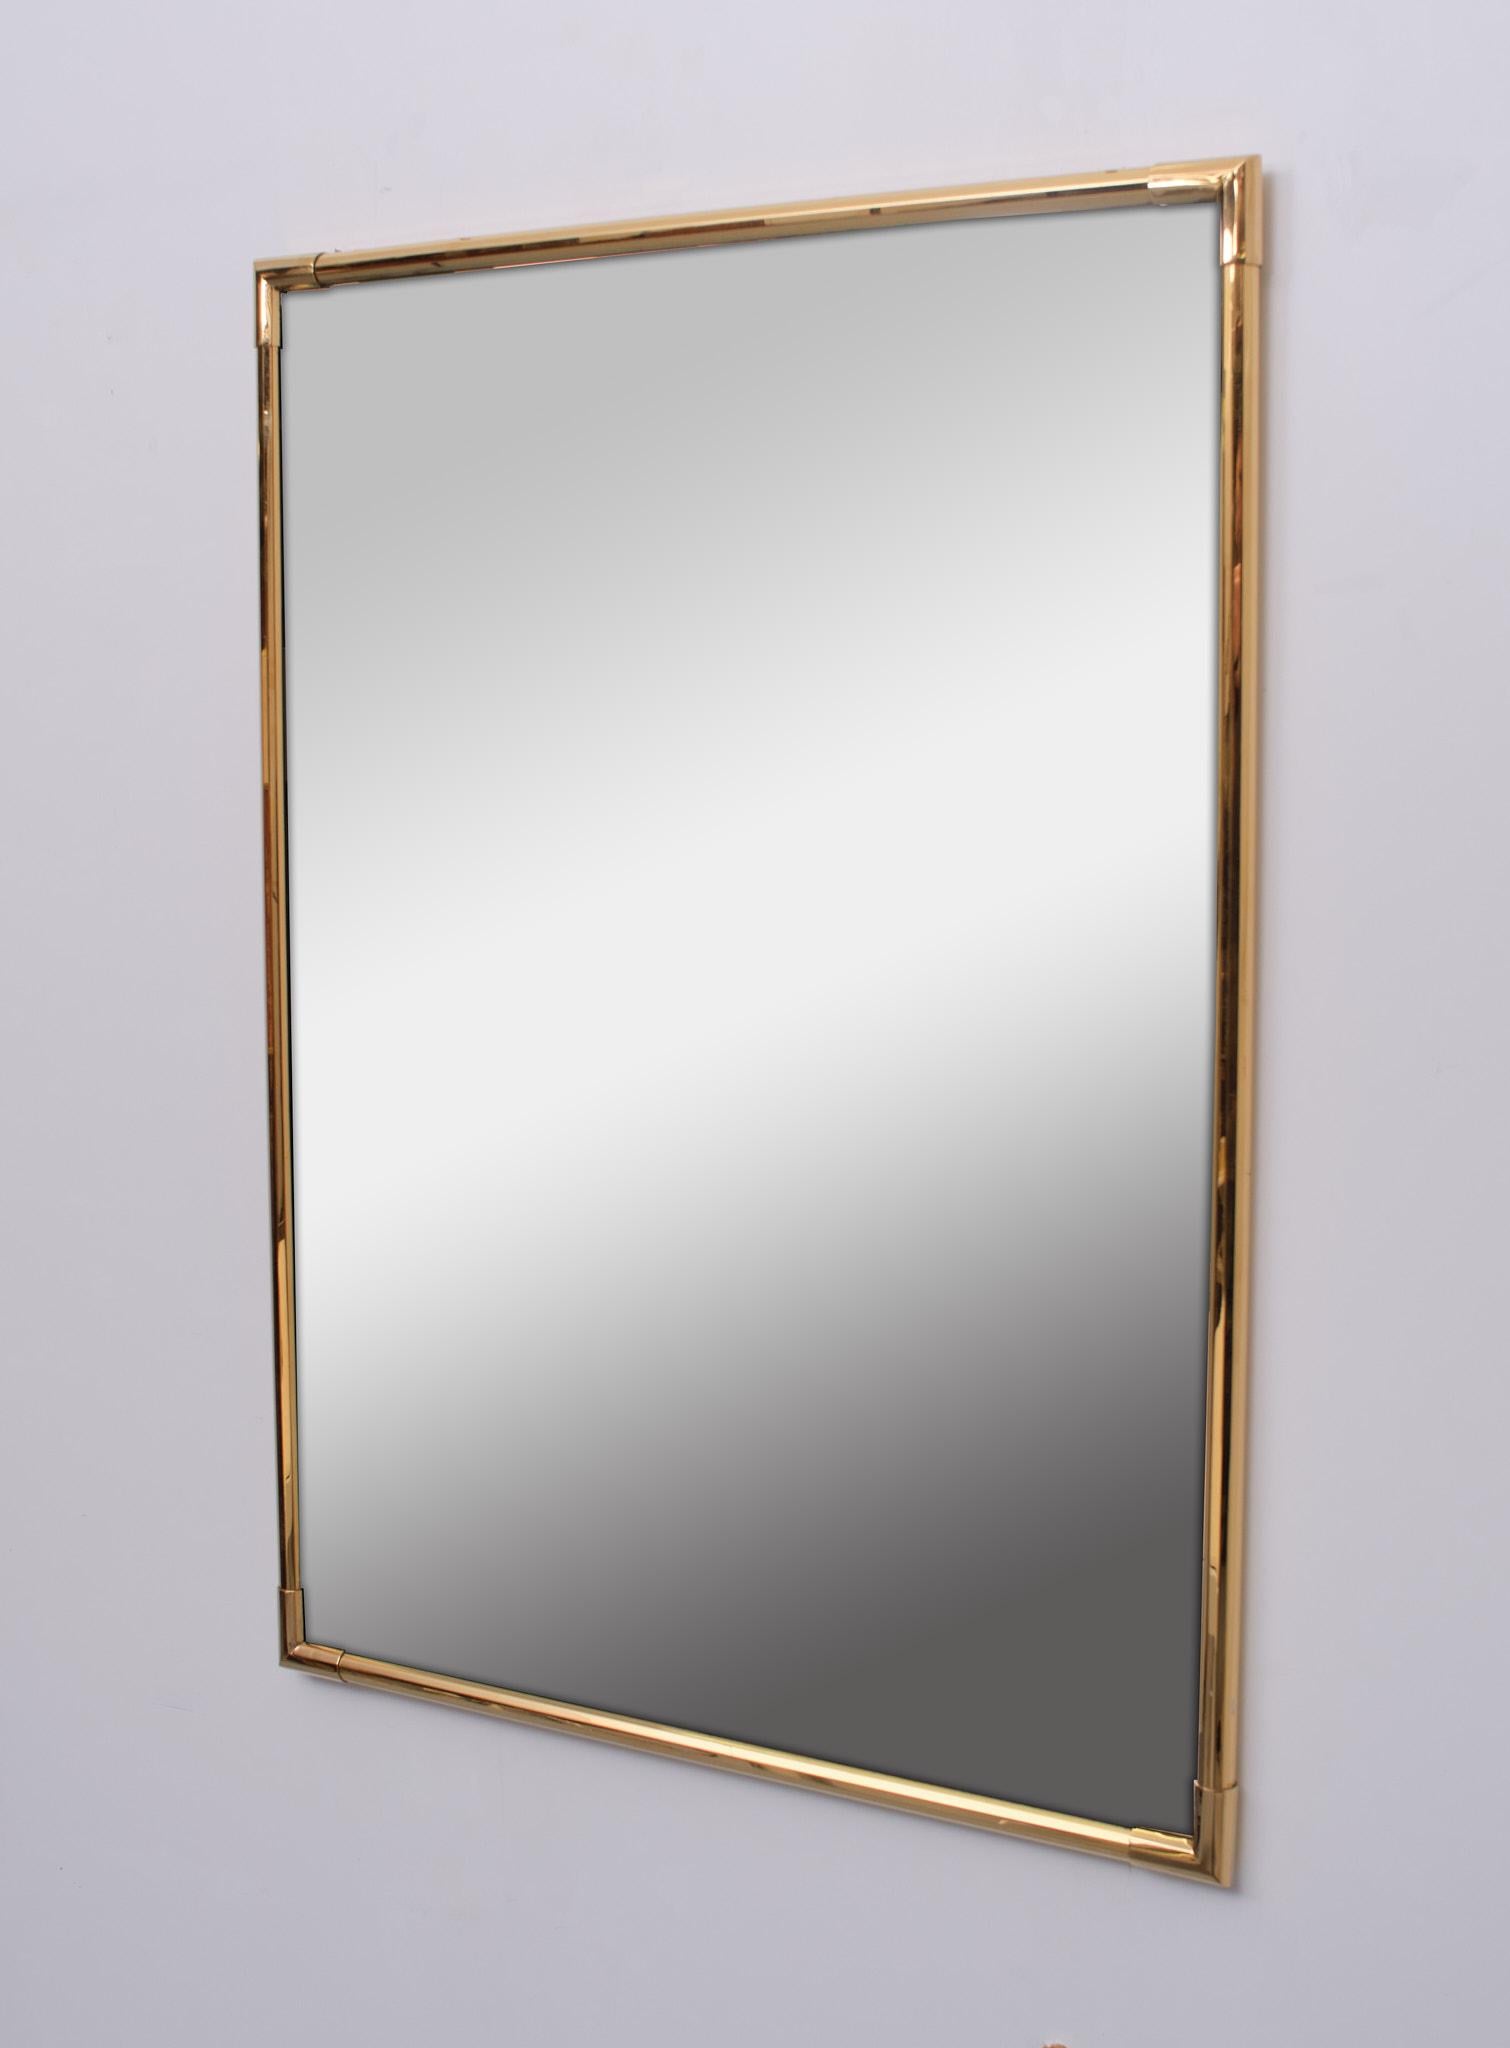 Octagonal Gold plated Brass frame. Thick new mirror. Very nice quality Mirror. 1970s Belgium .
 